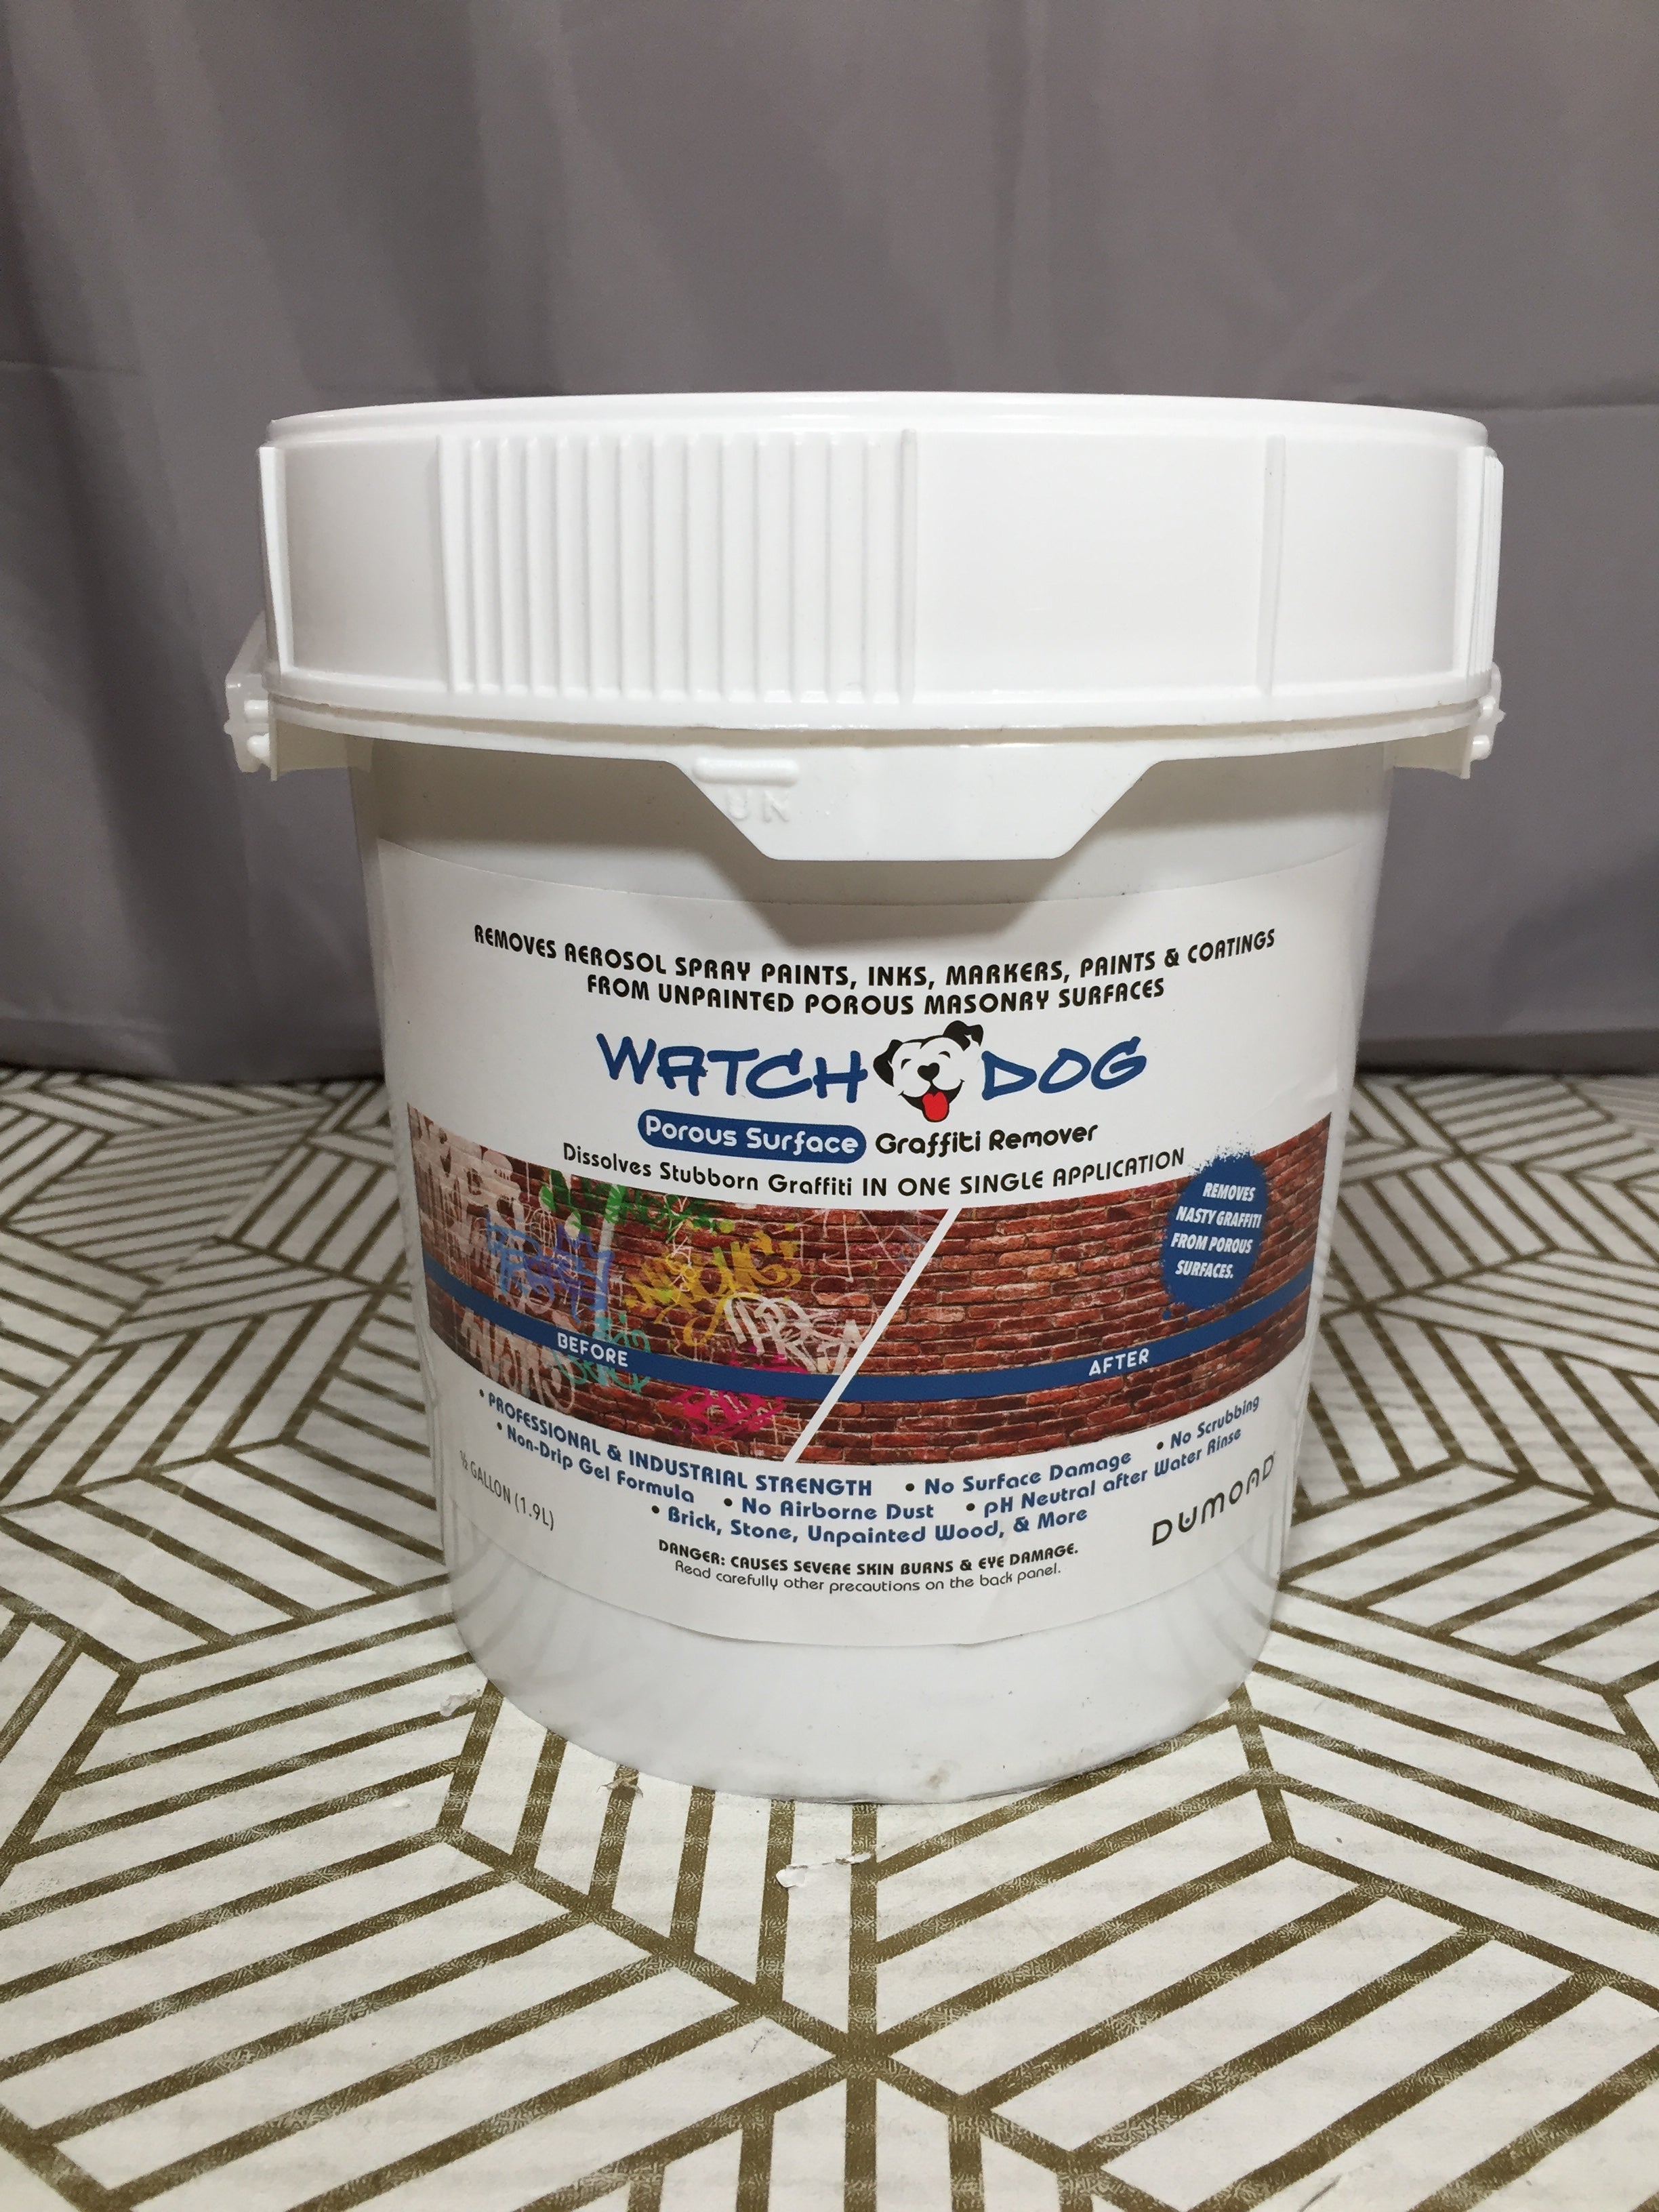 Dumond Chemicals, Inc. 8402 Watch Dog Wipe Out Porous Surface Graffiti Remover, 1/2 Gallon (8141239353582)